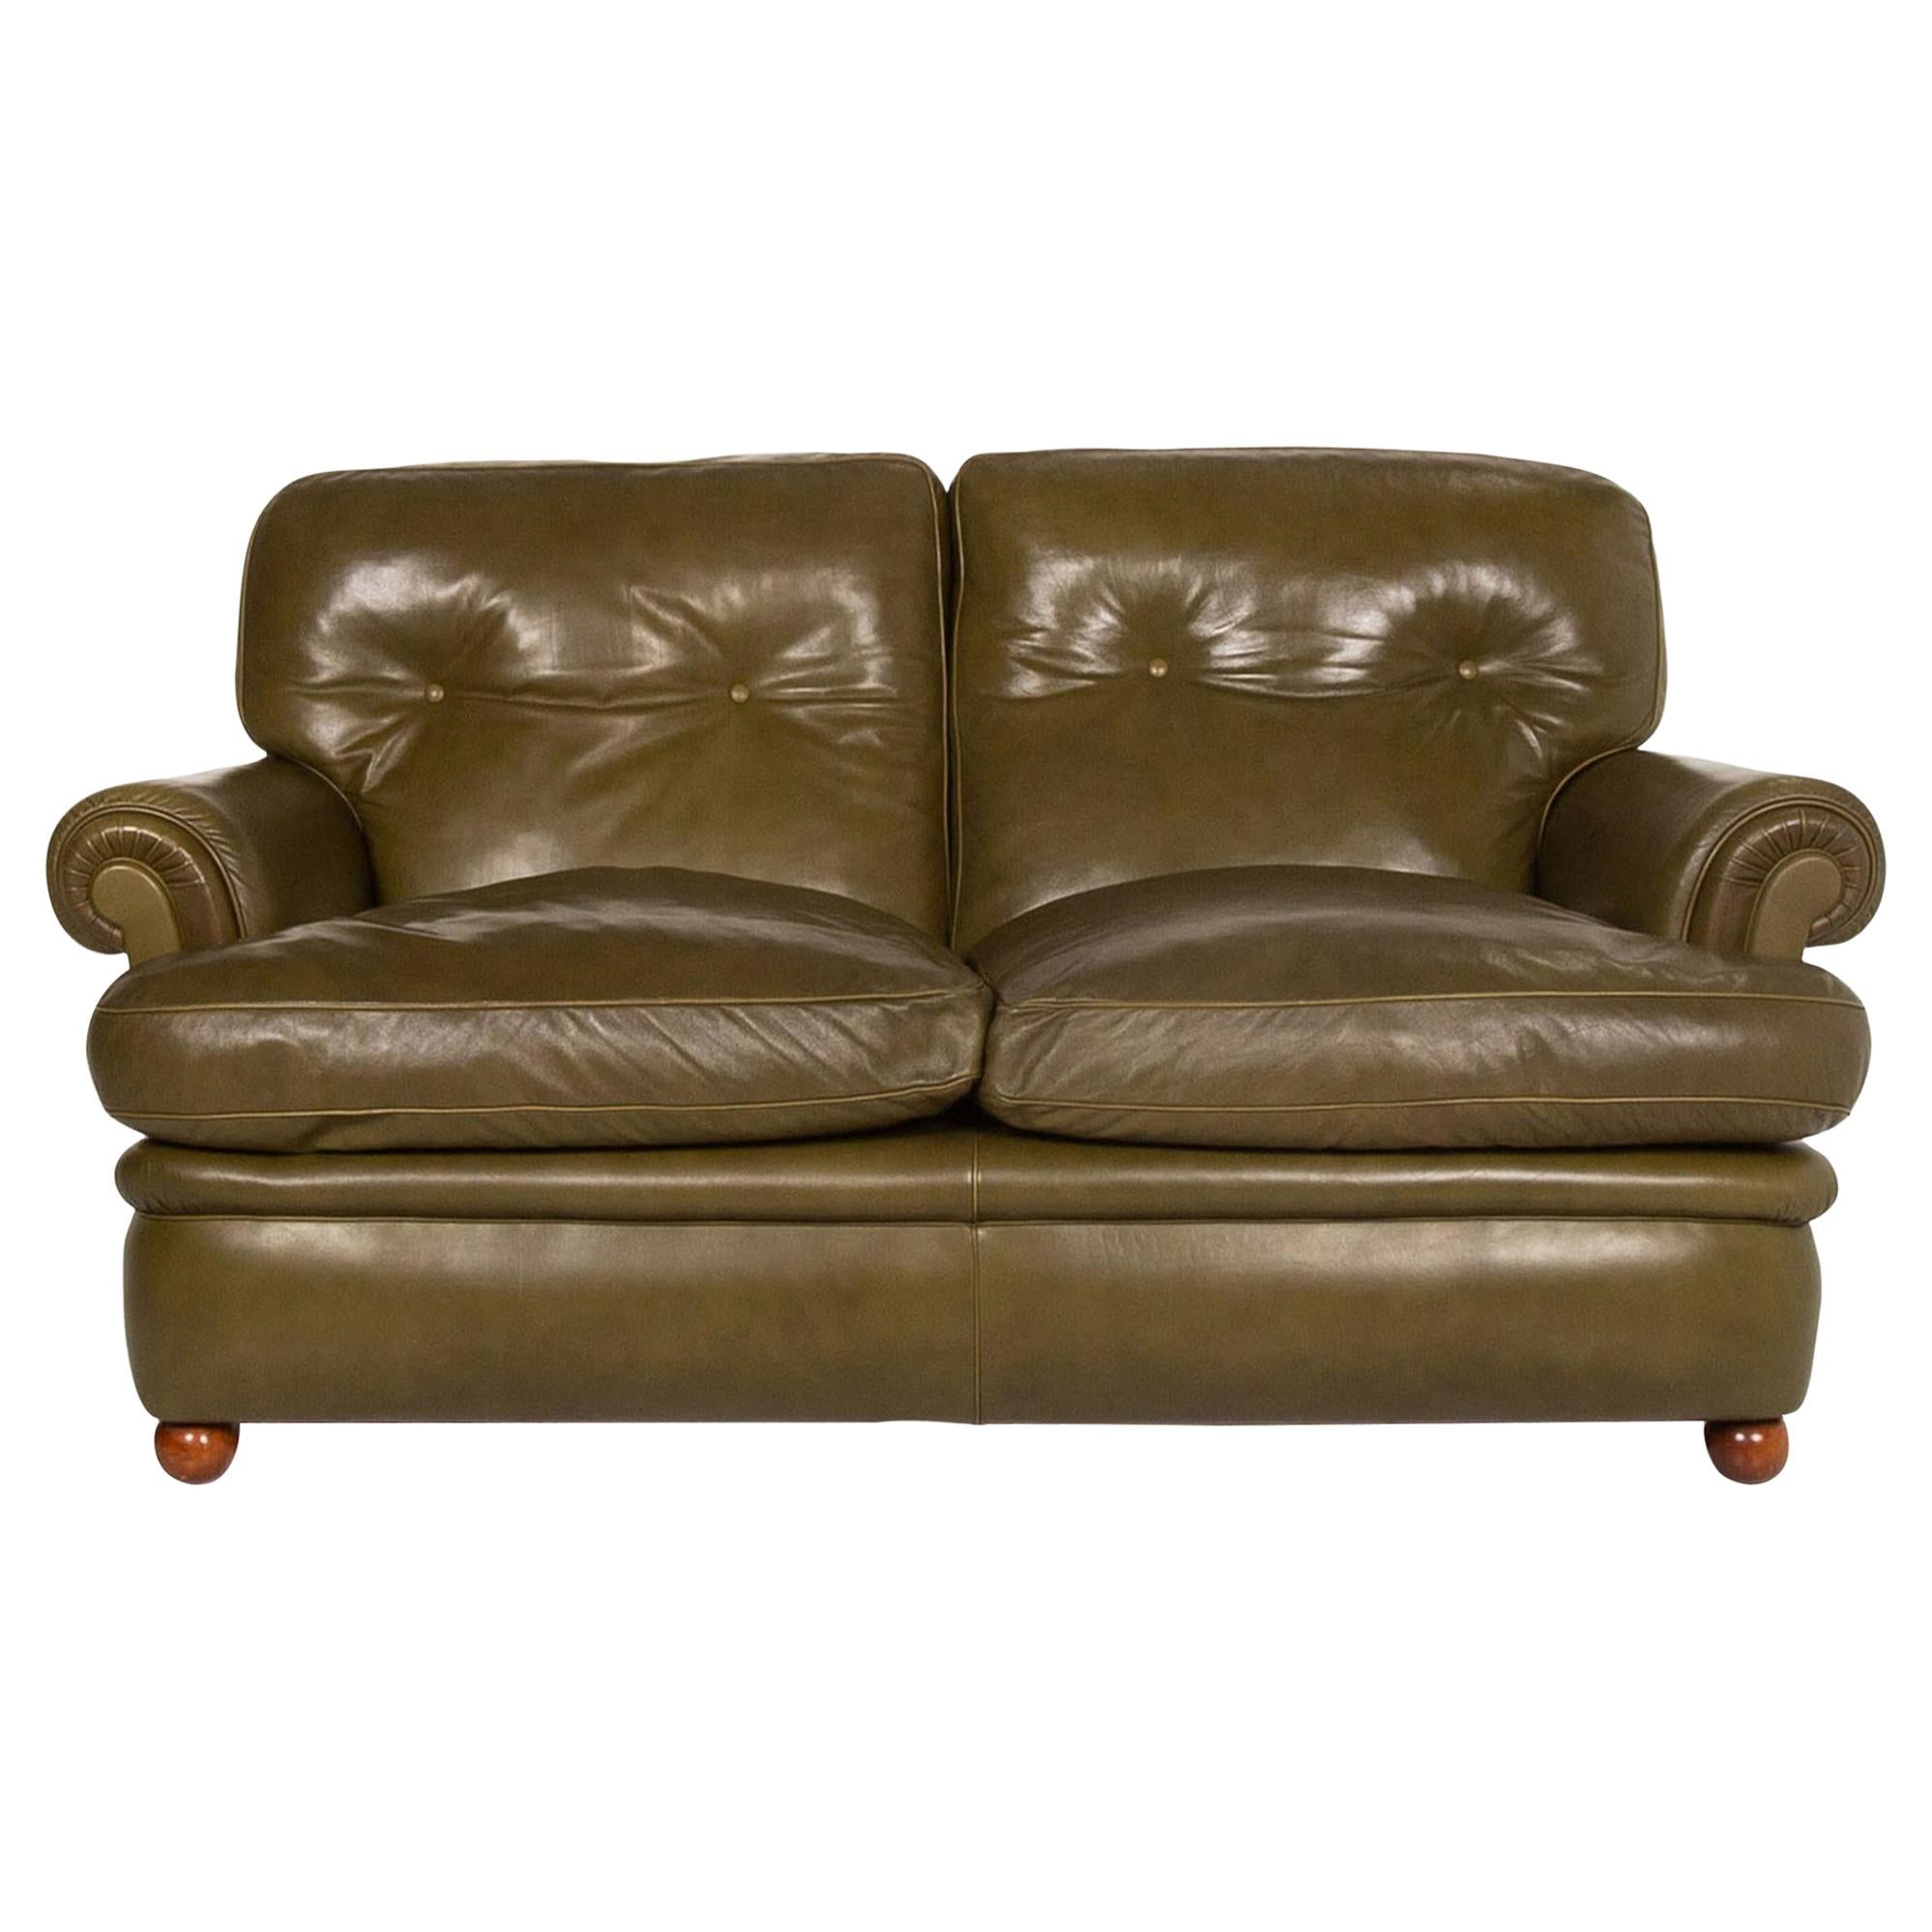 Poltrona Frau Leather Sofa Green Olive Green Two-Seat Couch Retro For Sale